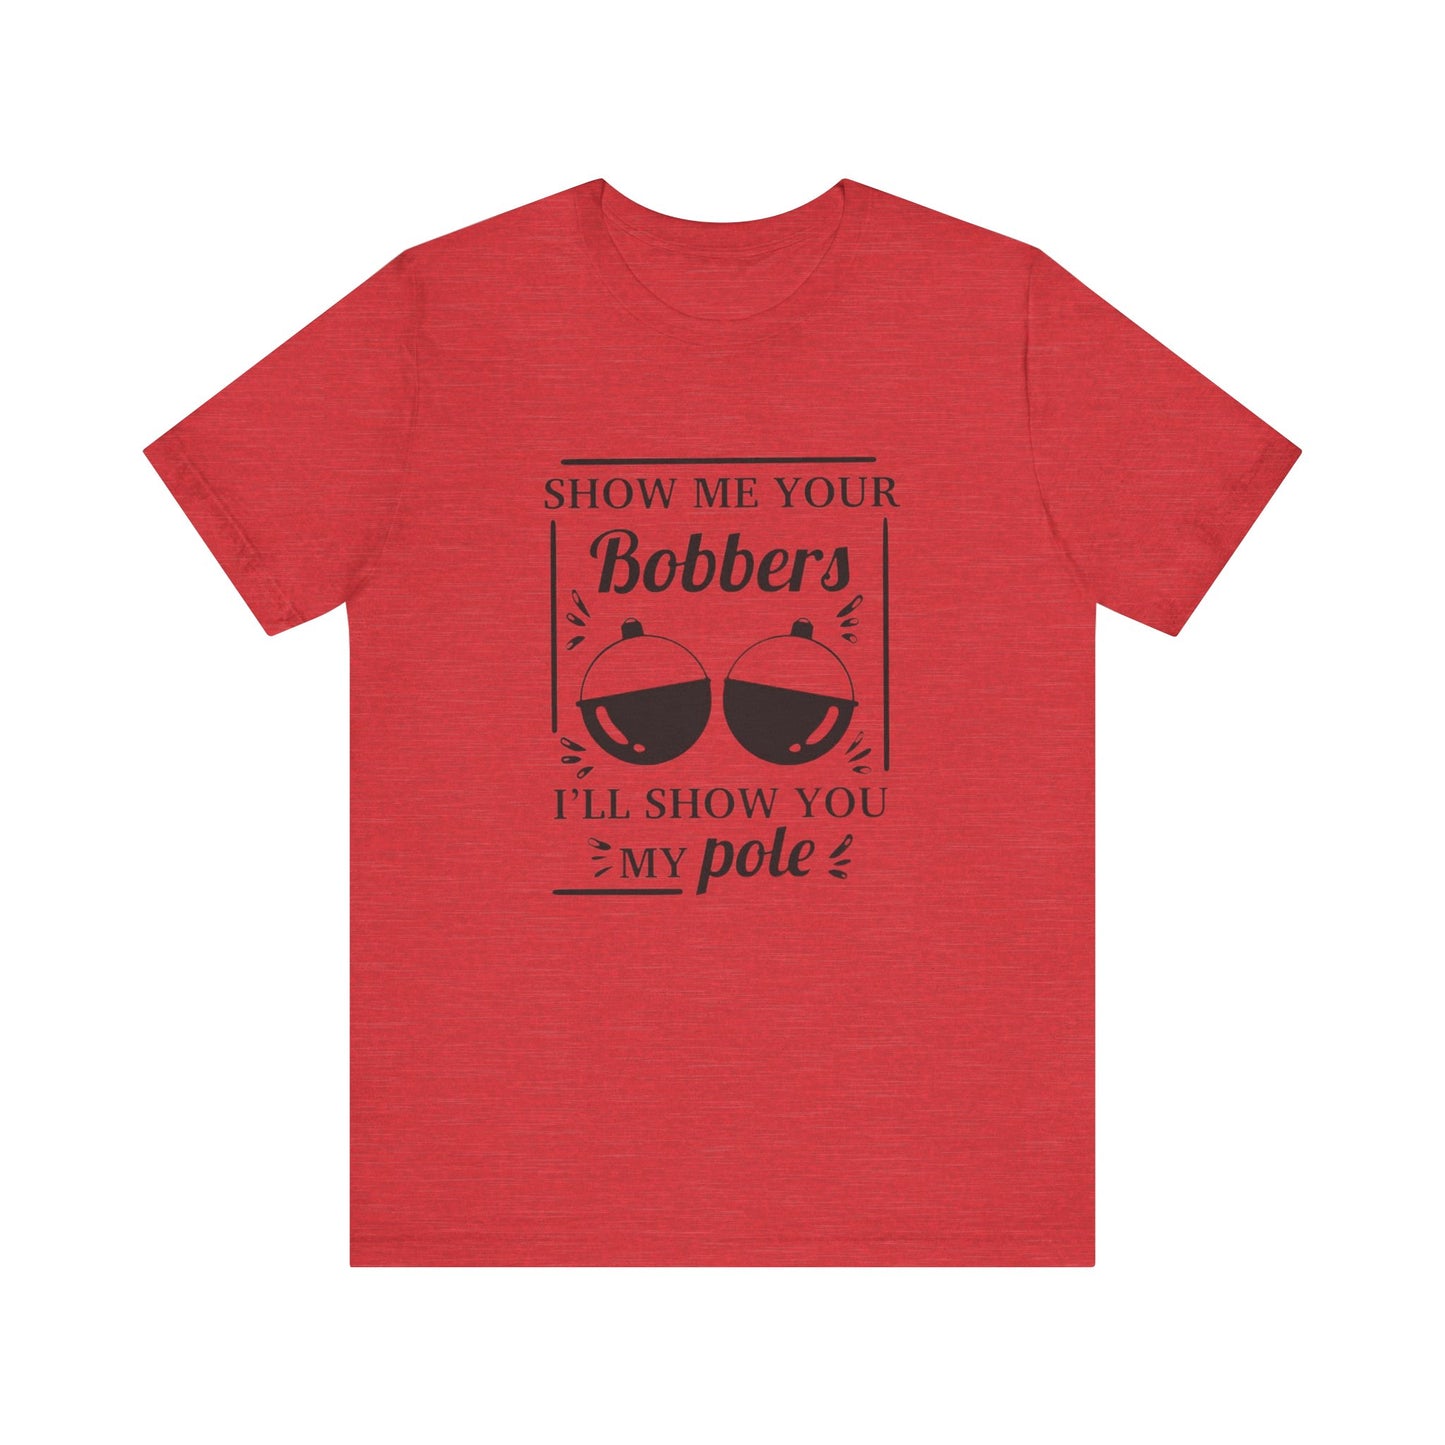 Show me your bobbers, I'll show you my pole - Unisex T-Shirt